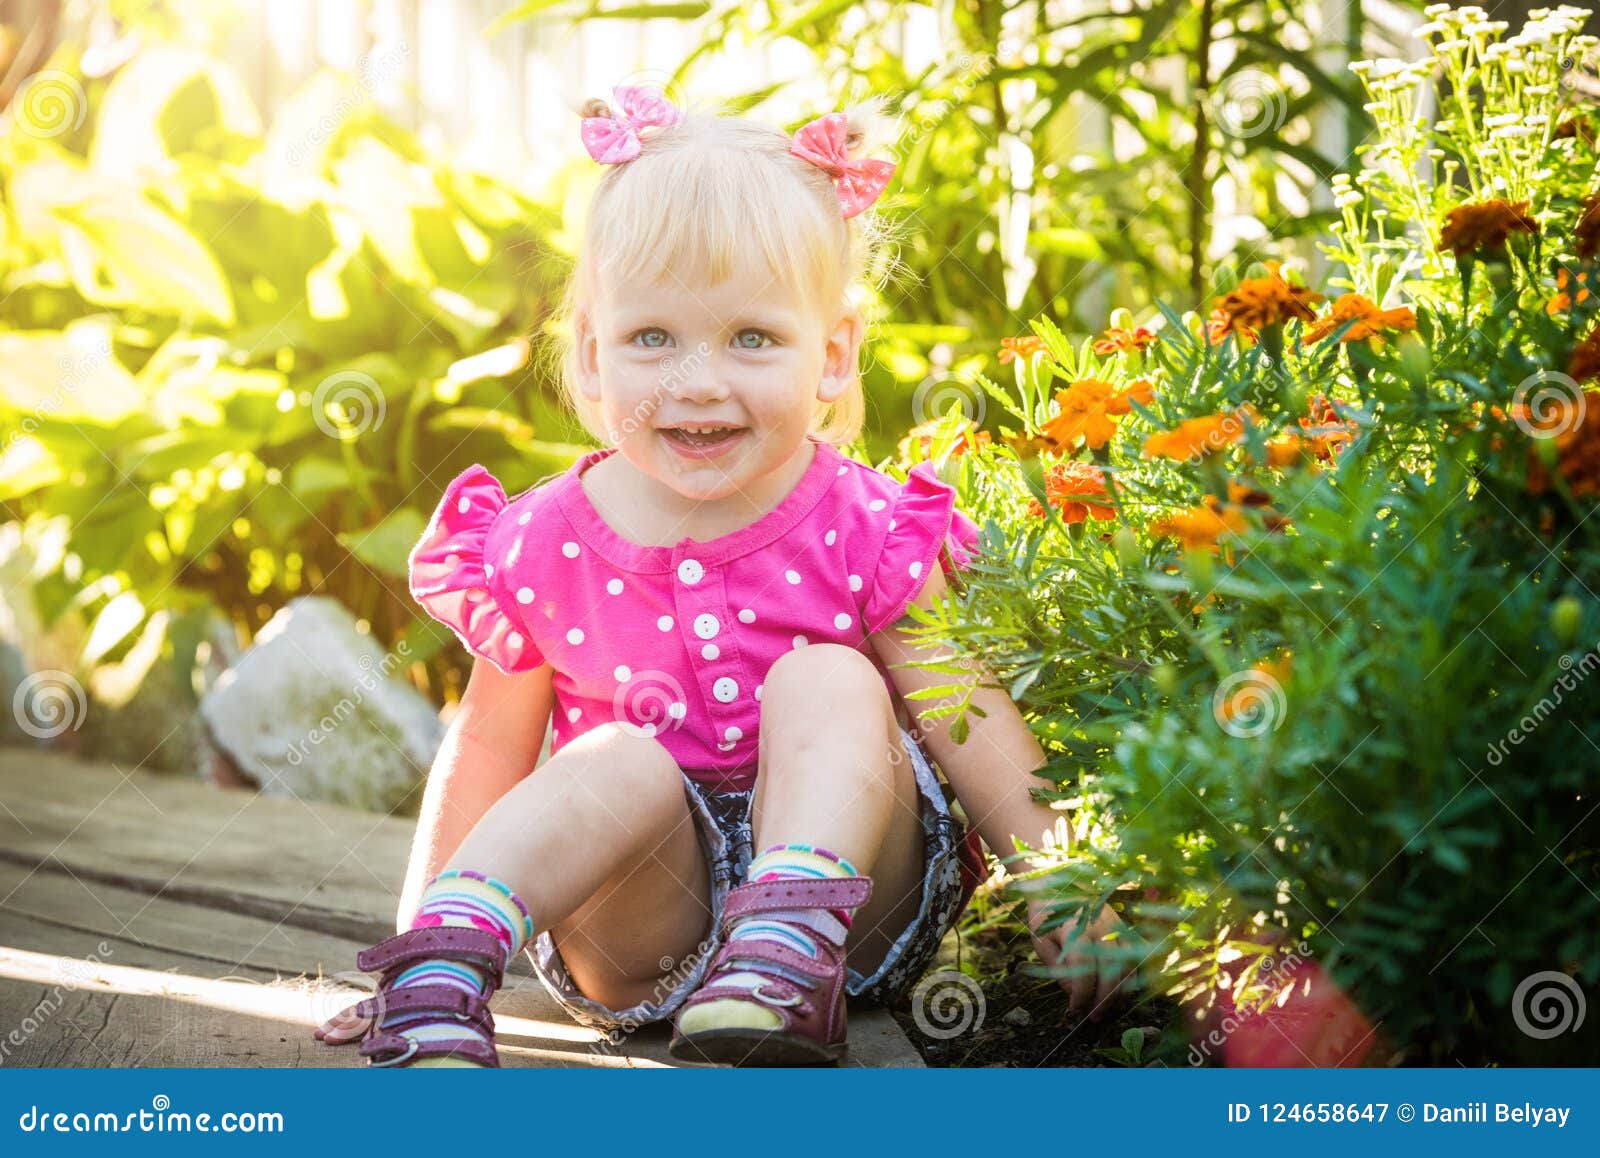 Beautiful Happy Little Baby Girl on a Green Bright Summer Background ...